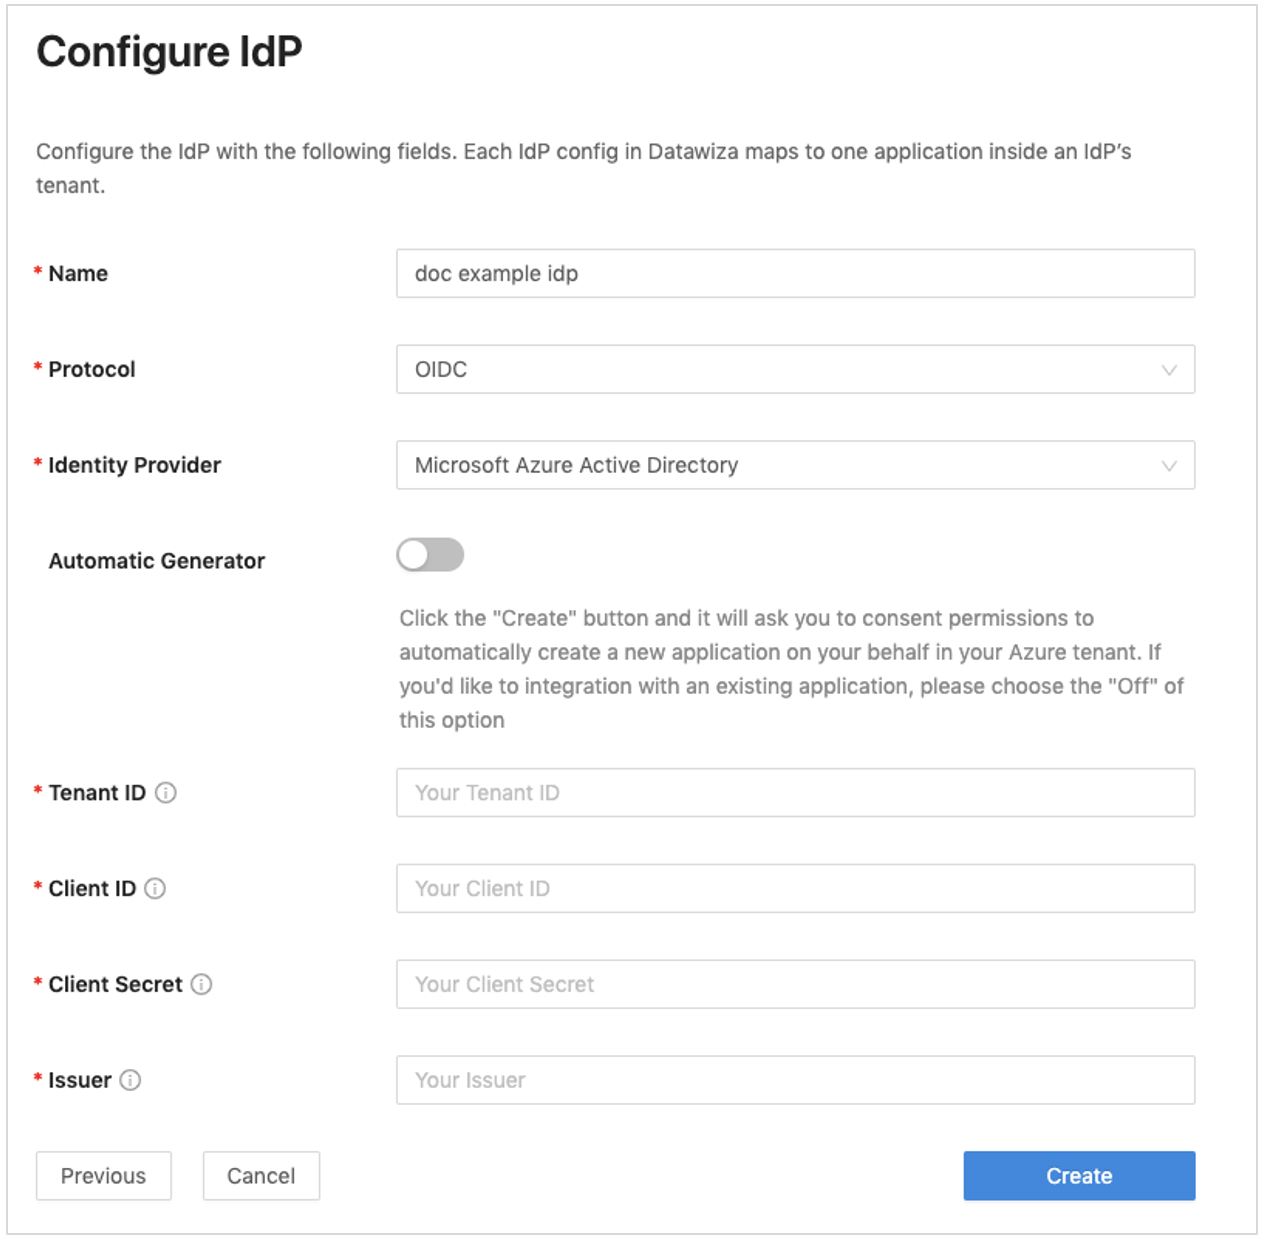 image shows configure idp using form